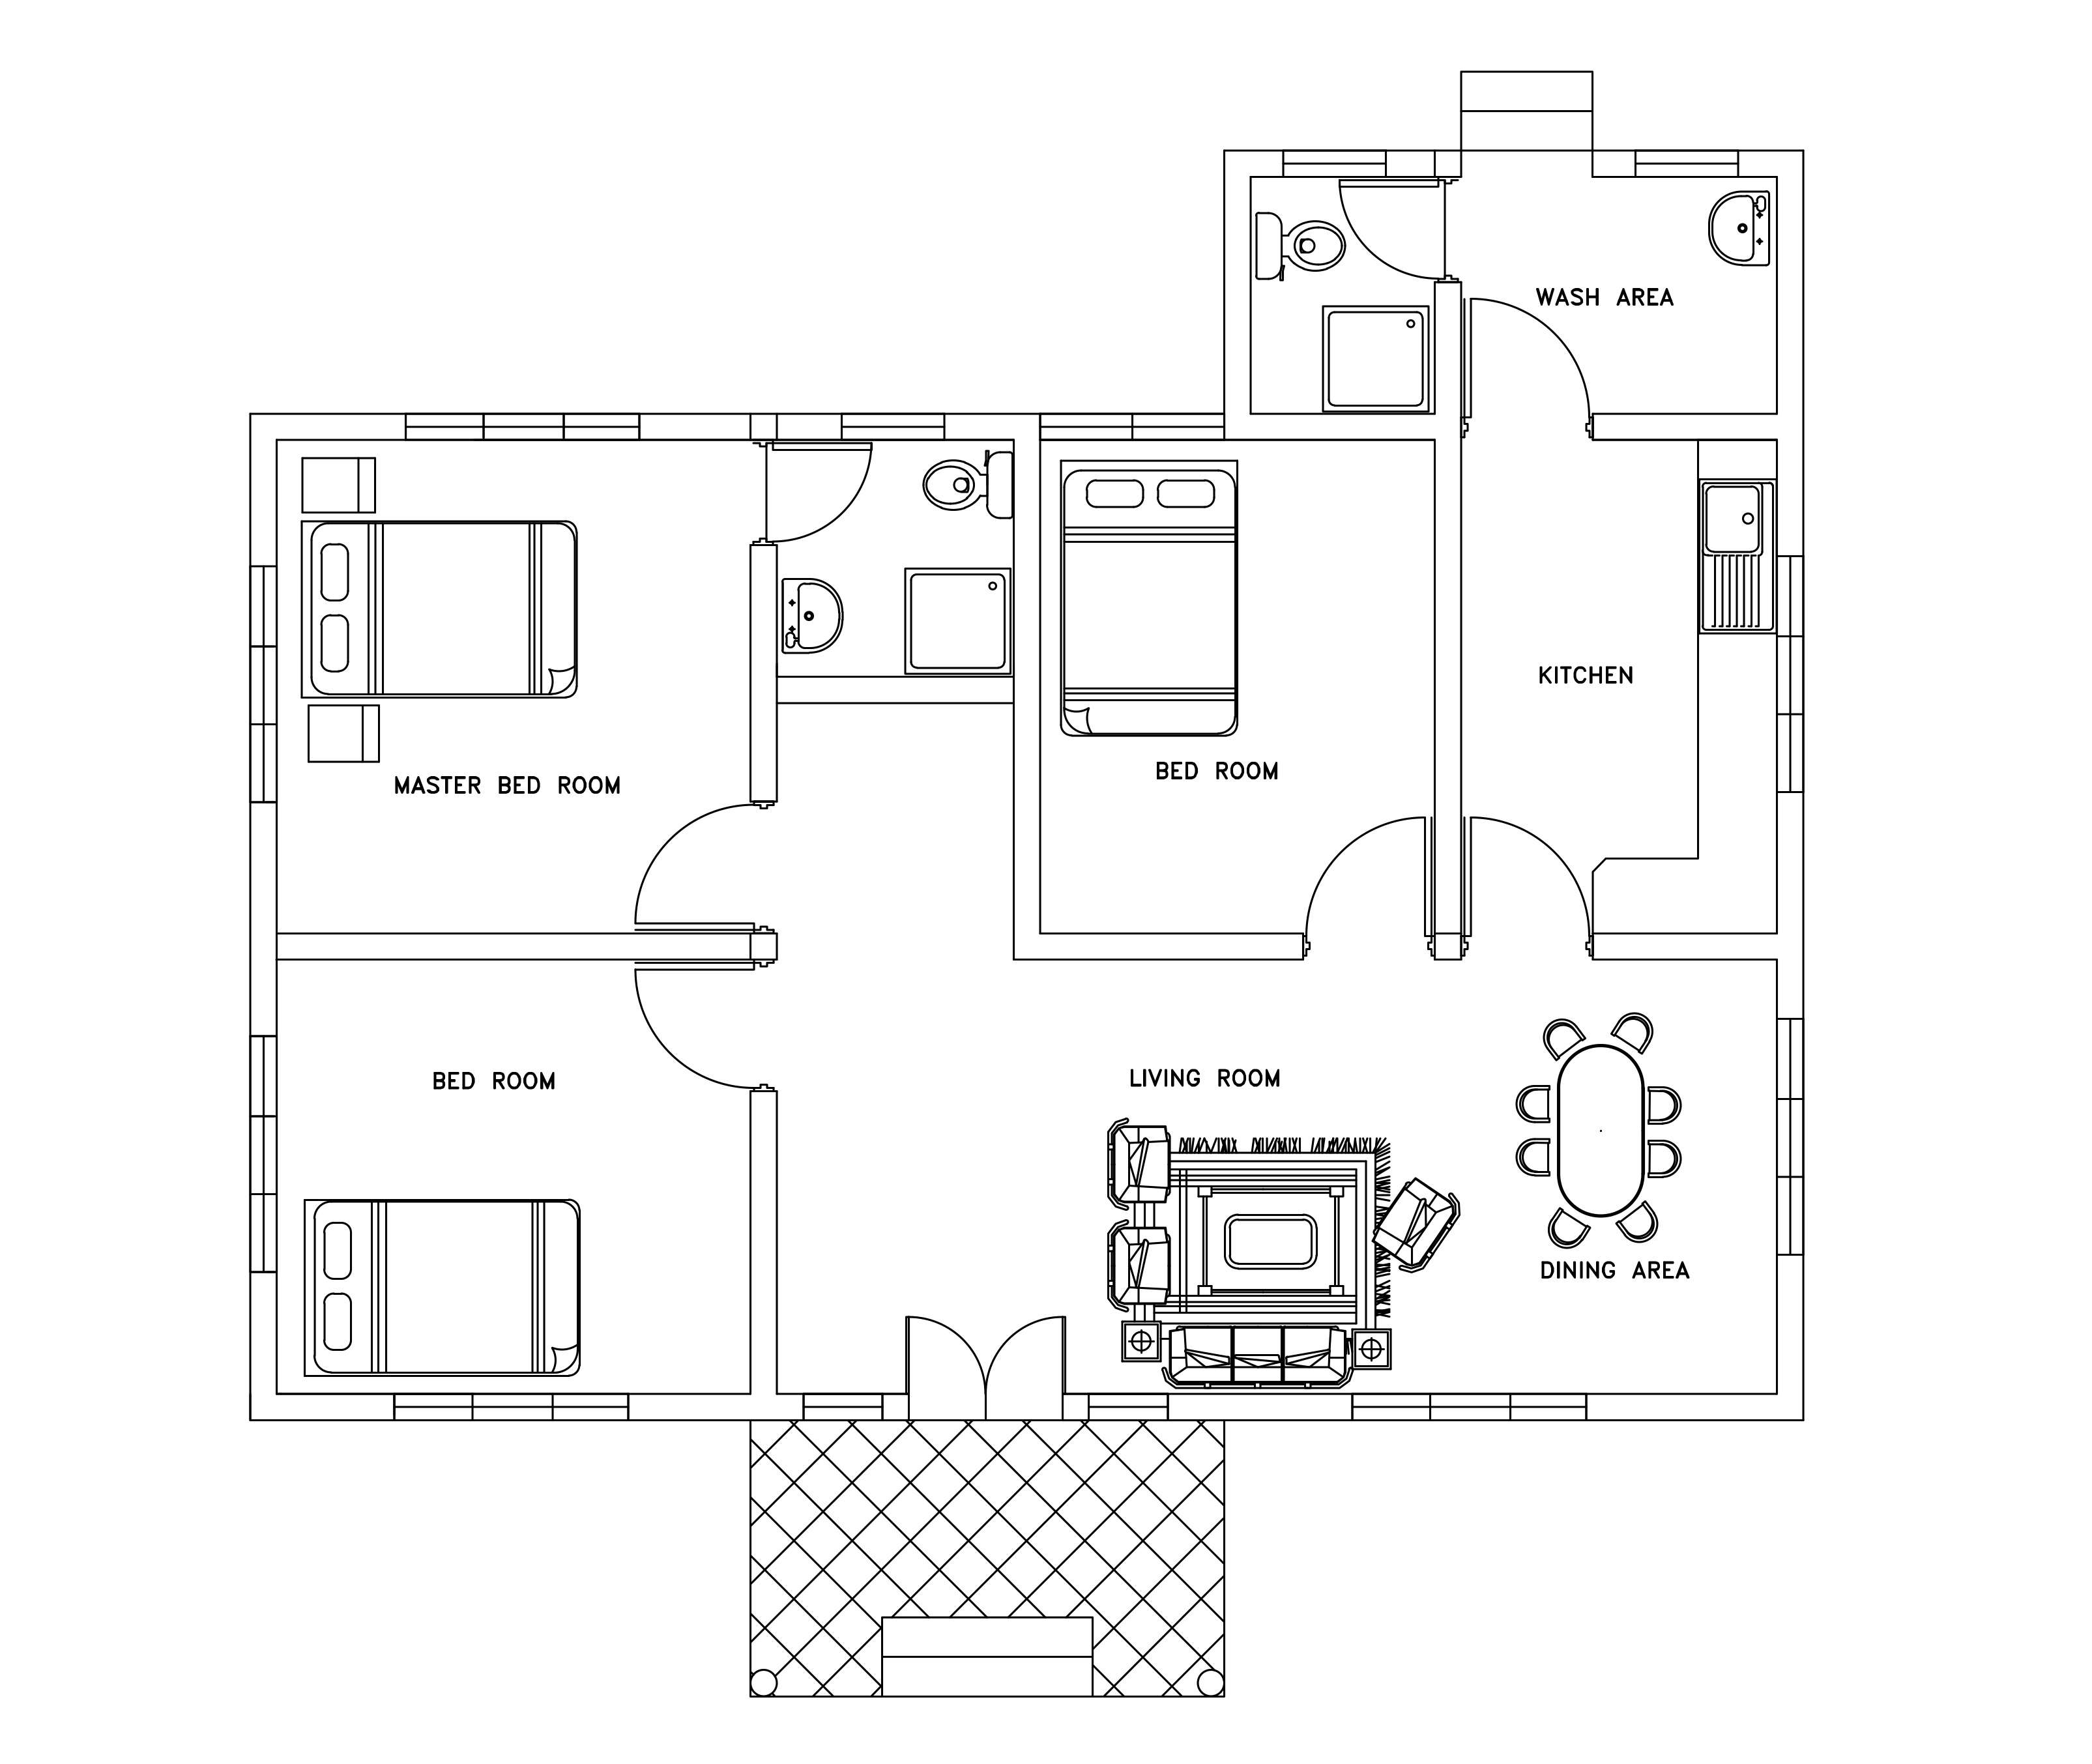 Single Story Three Bed Room Small House Plan Free Download With